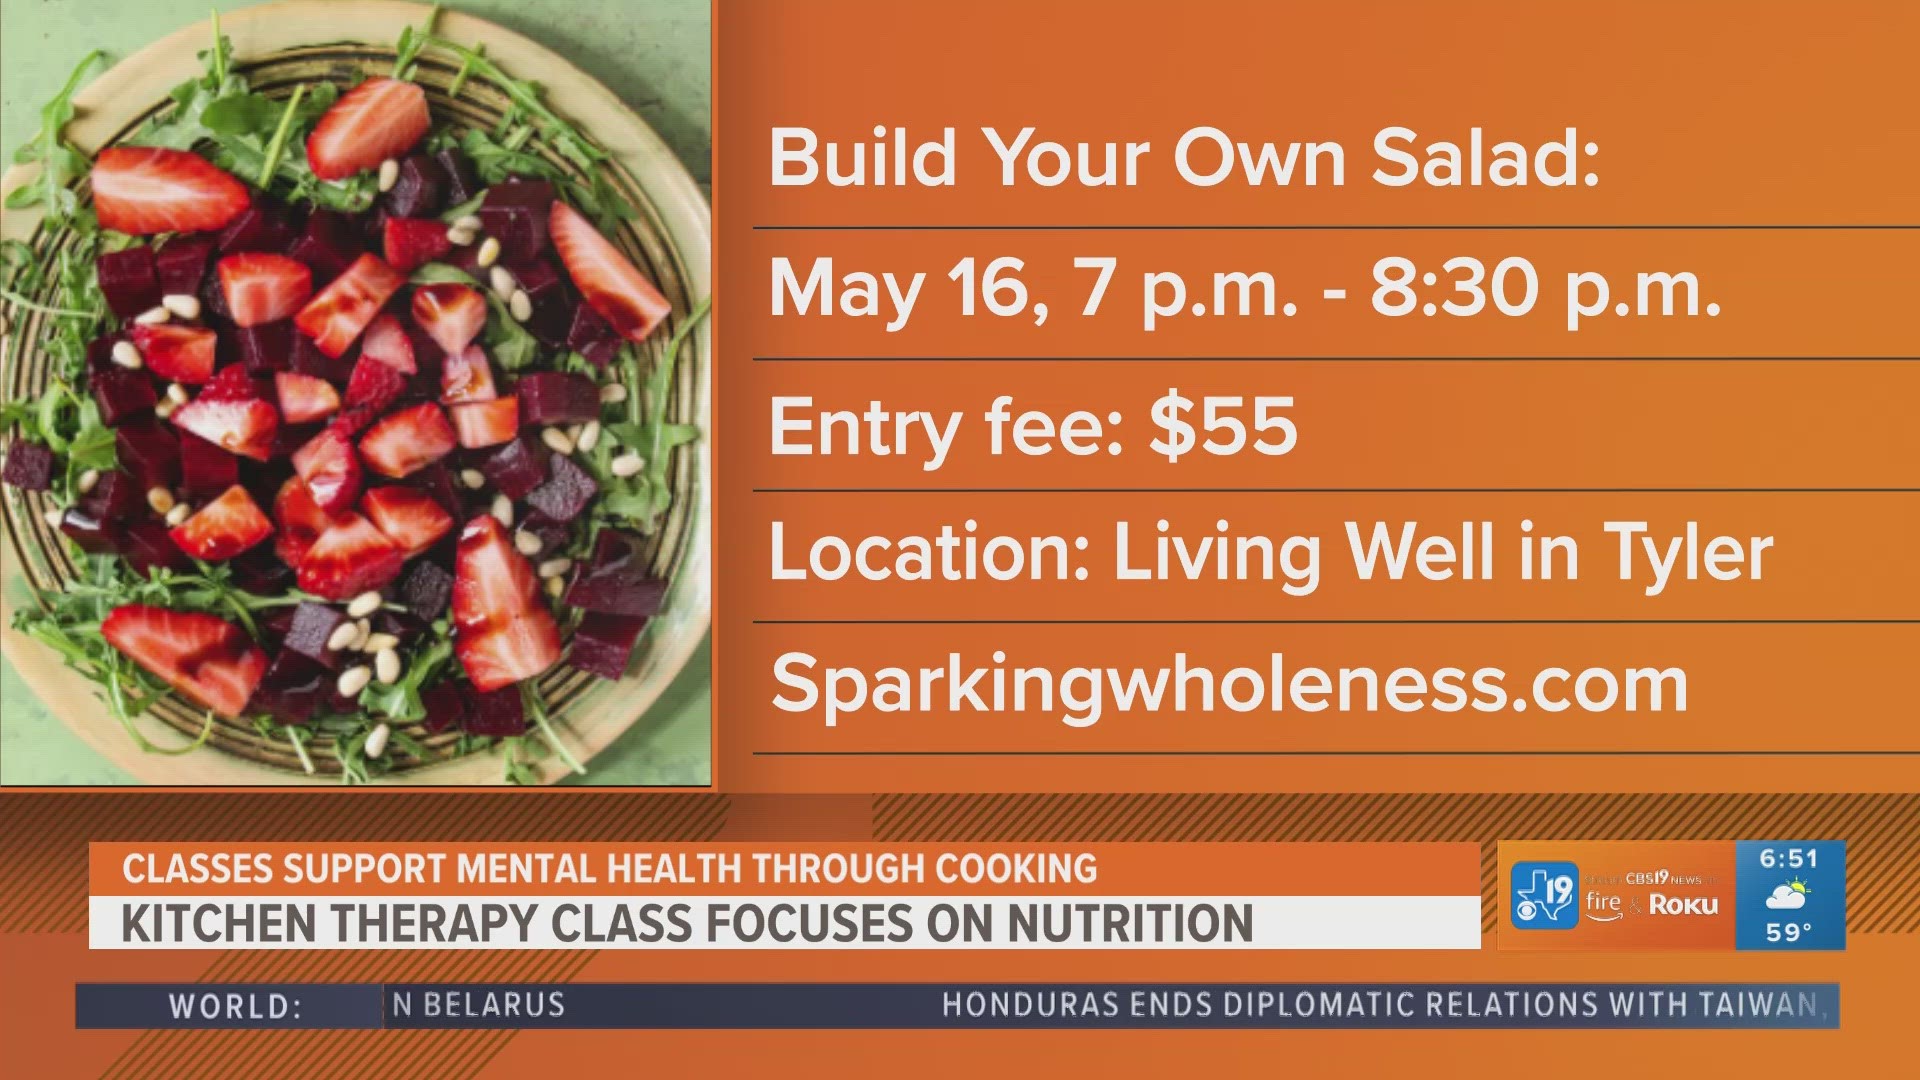 Kitchen Therapy classes support mental health through cooking.